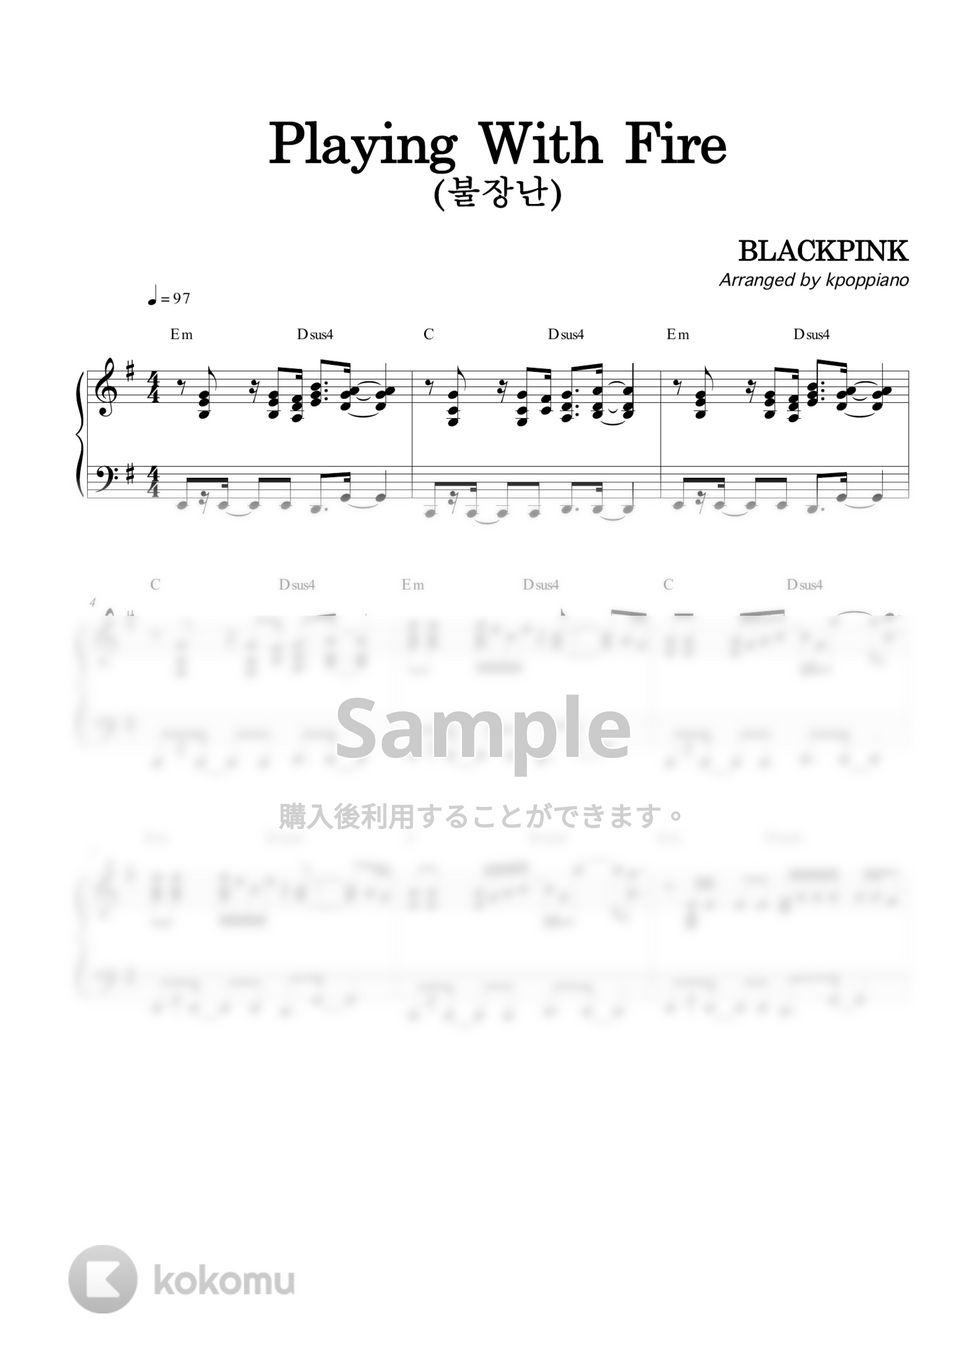 BLACKPINK - 火遊び (PLAYING WITH FIRE) by KPOP PIANO